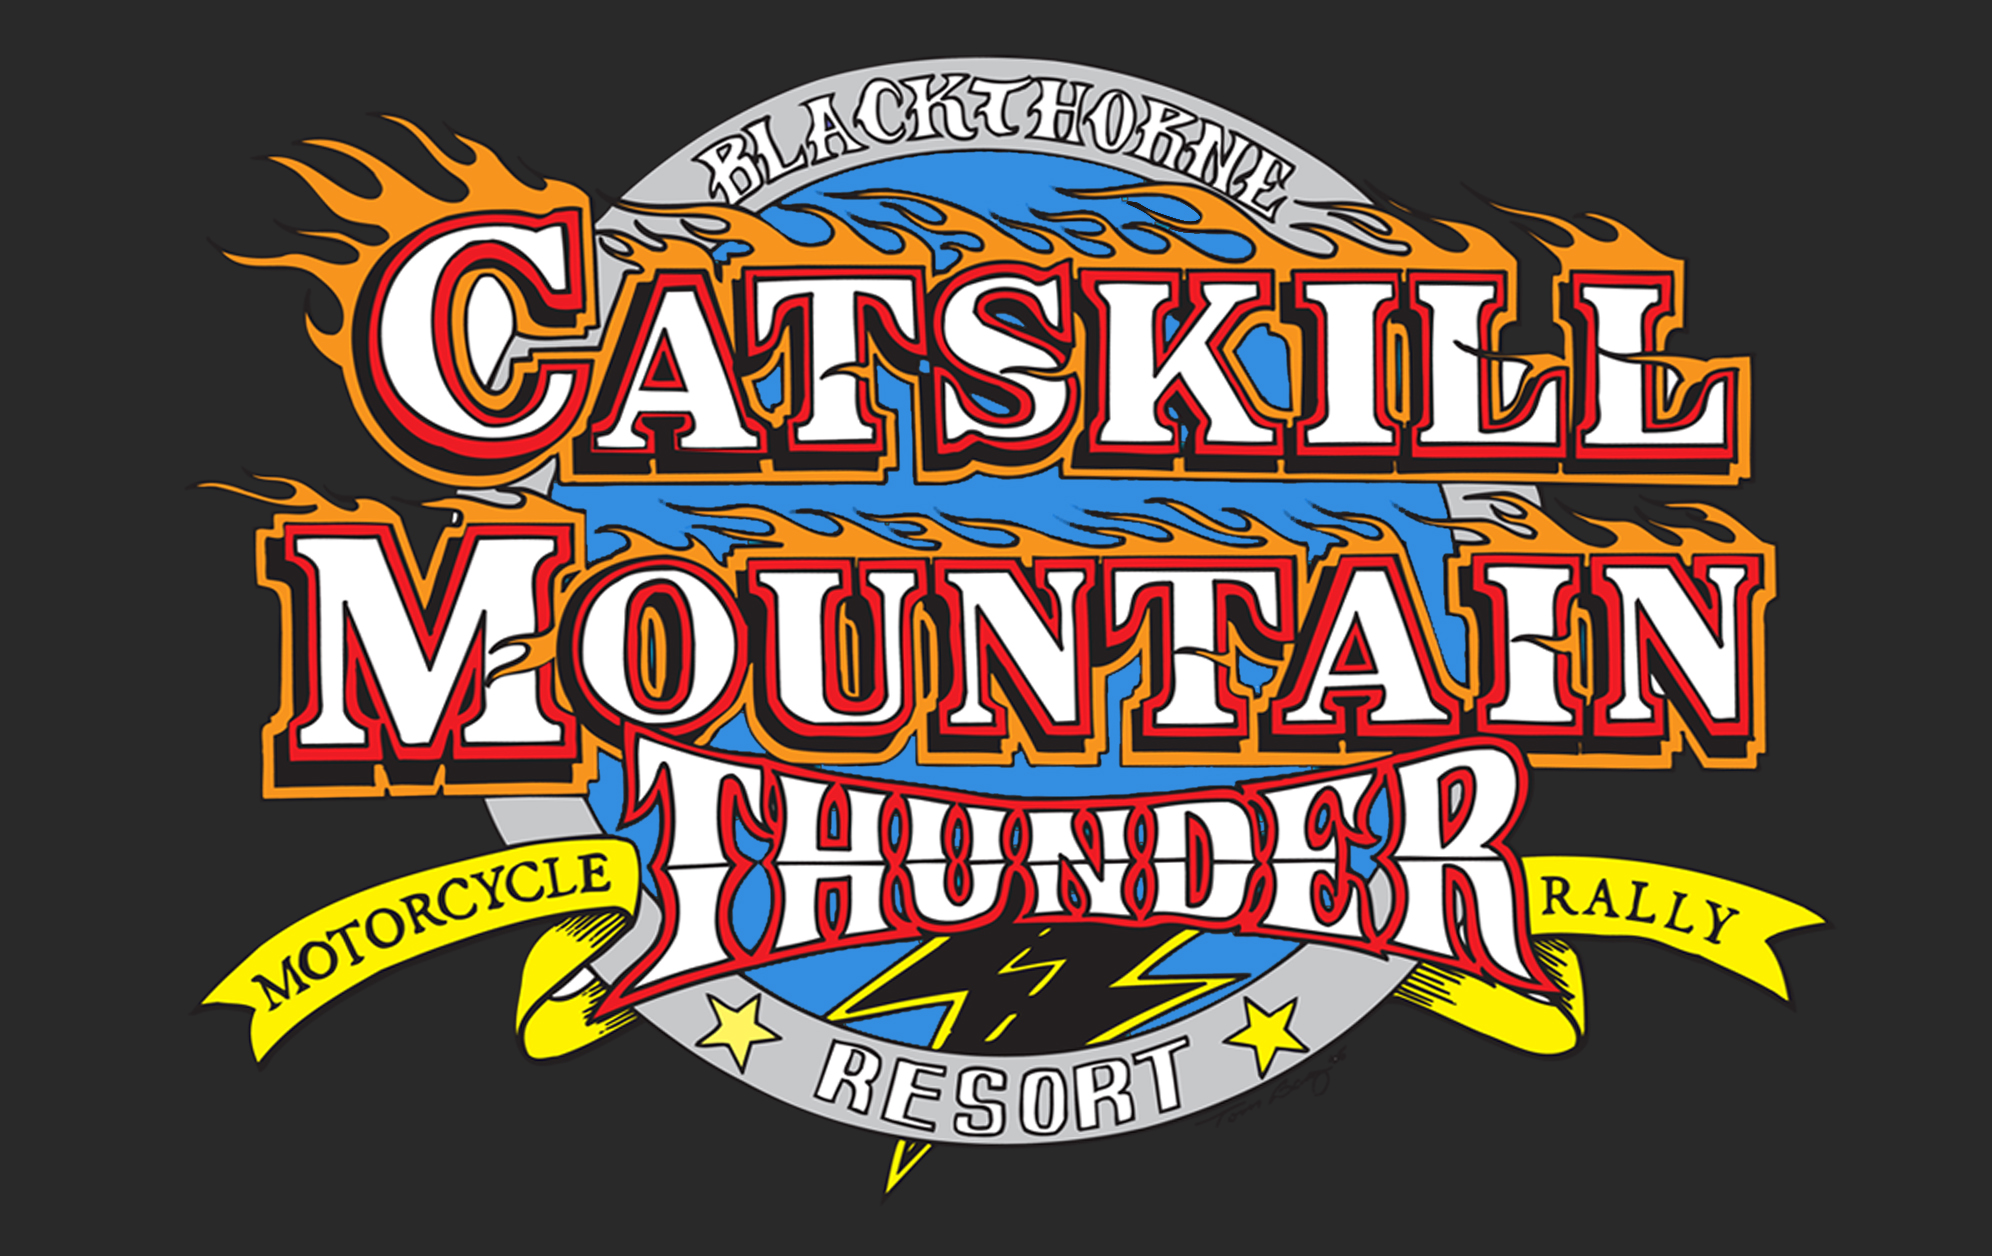 Catskill Mountain Thunder Motorcycle festival! - Motorcycle Event in New York, USA ...1992 x 1256